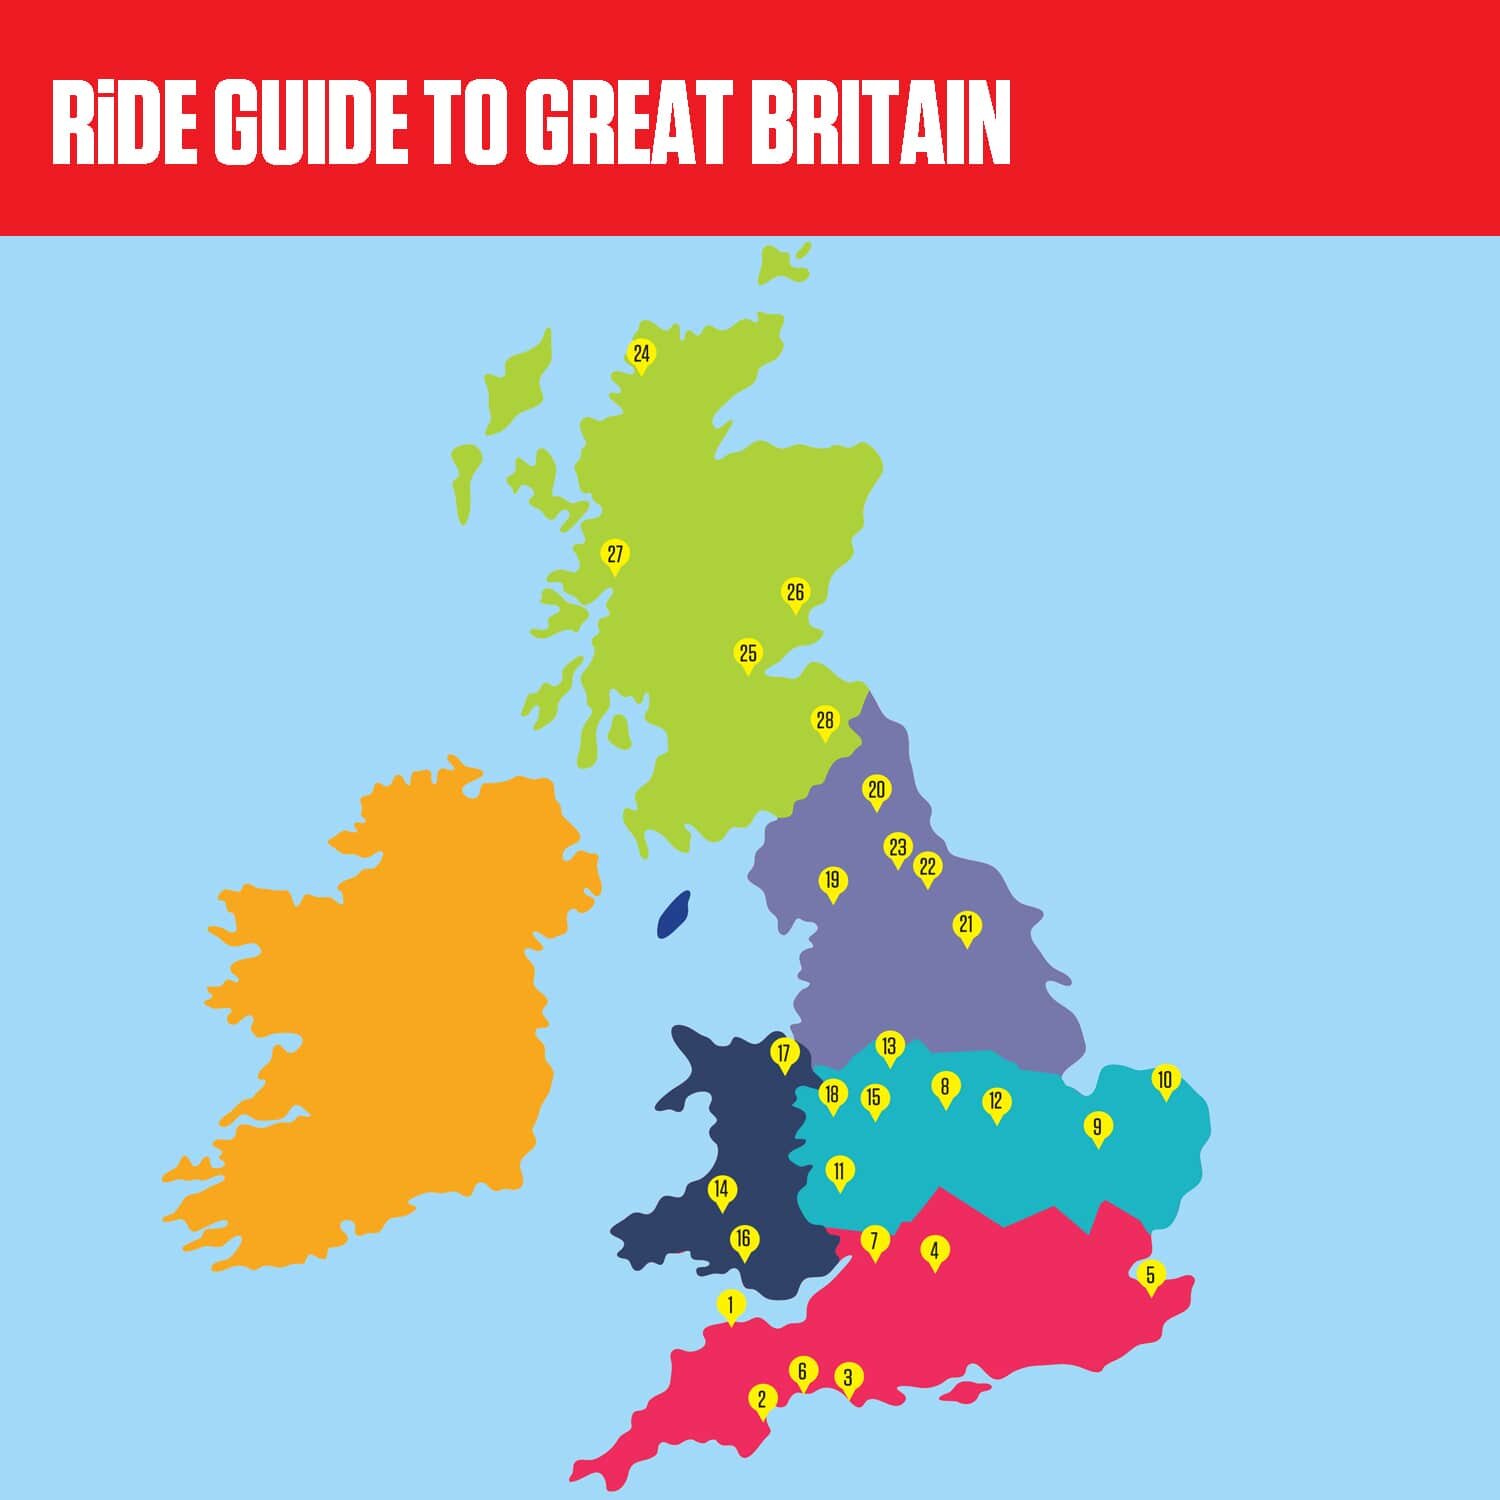 RiDE Guide to Great Britain